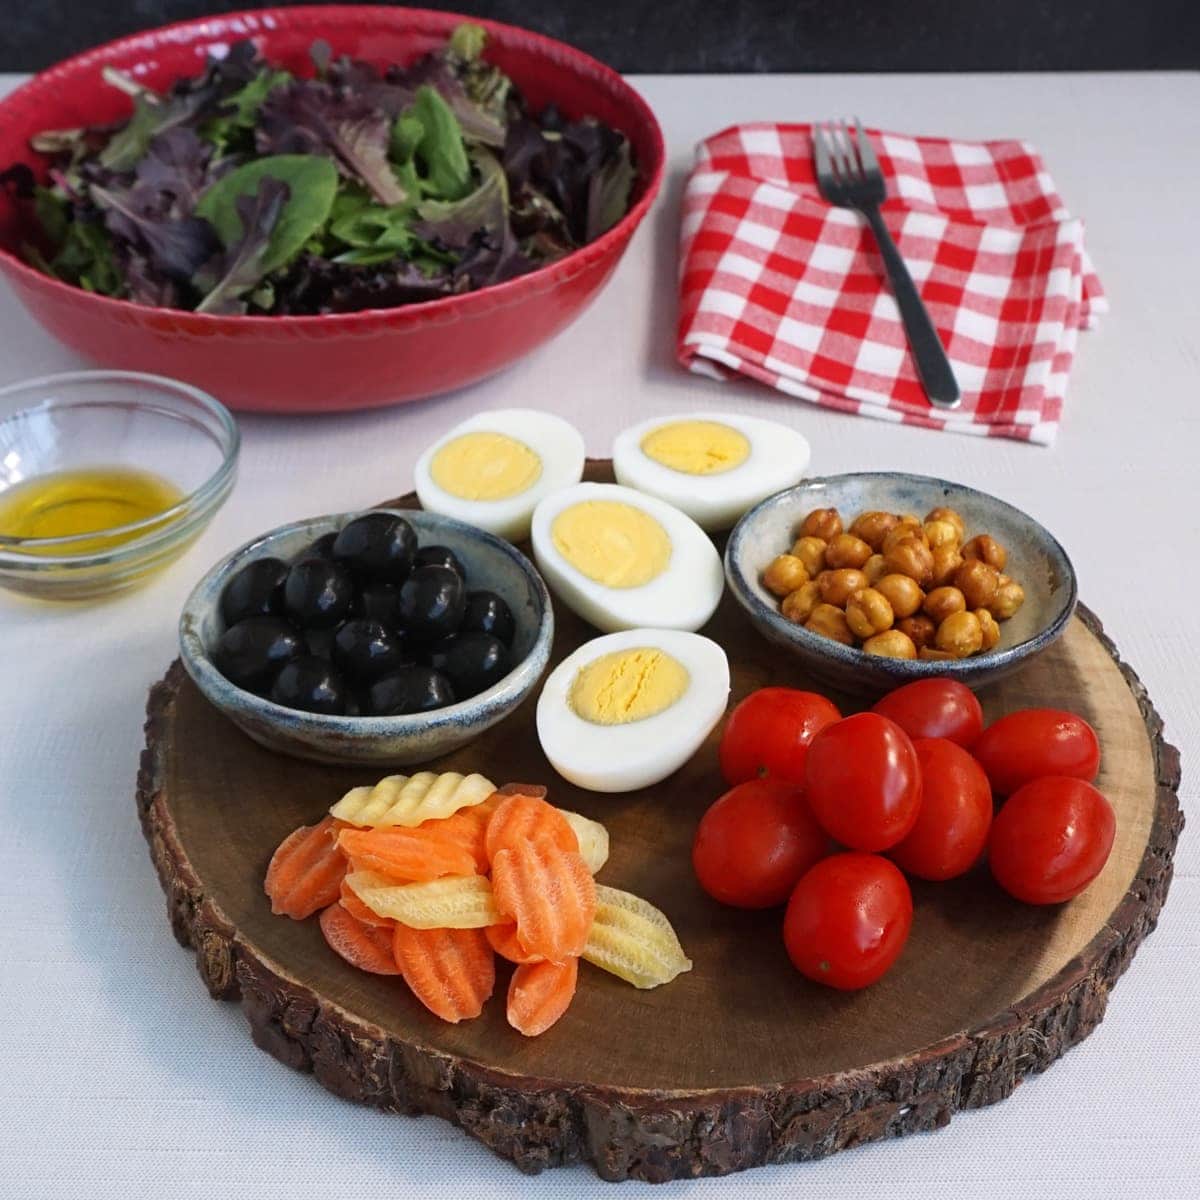 Charcuterie Board: cherry tomato, boiled eggs, carrots, olives, roasted chickpeas, with a side of greens and oil